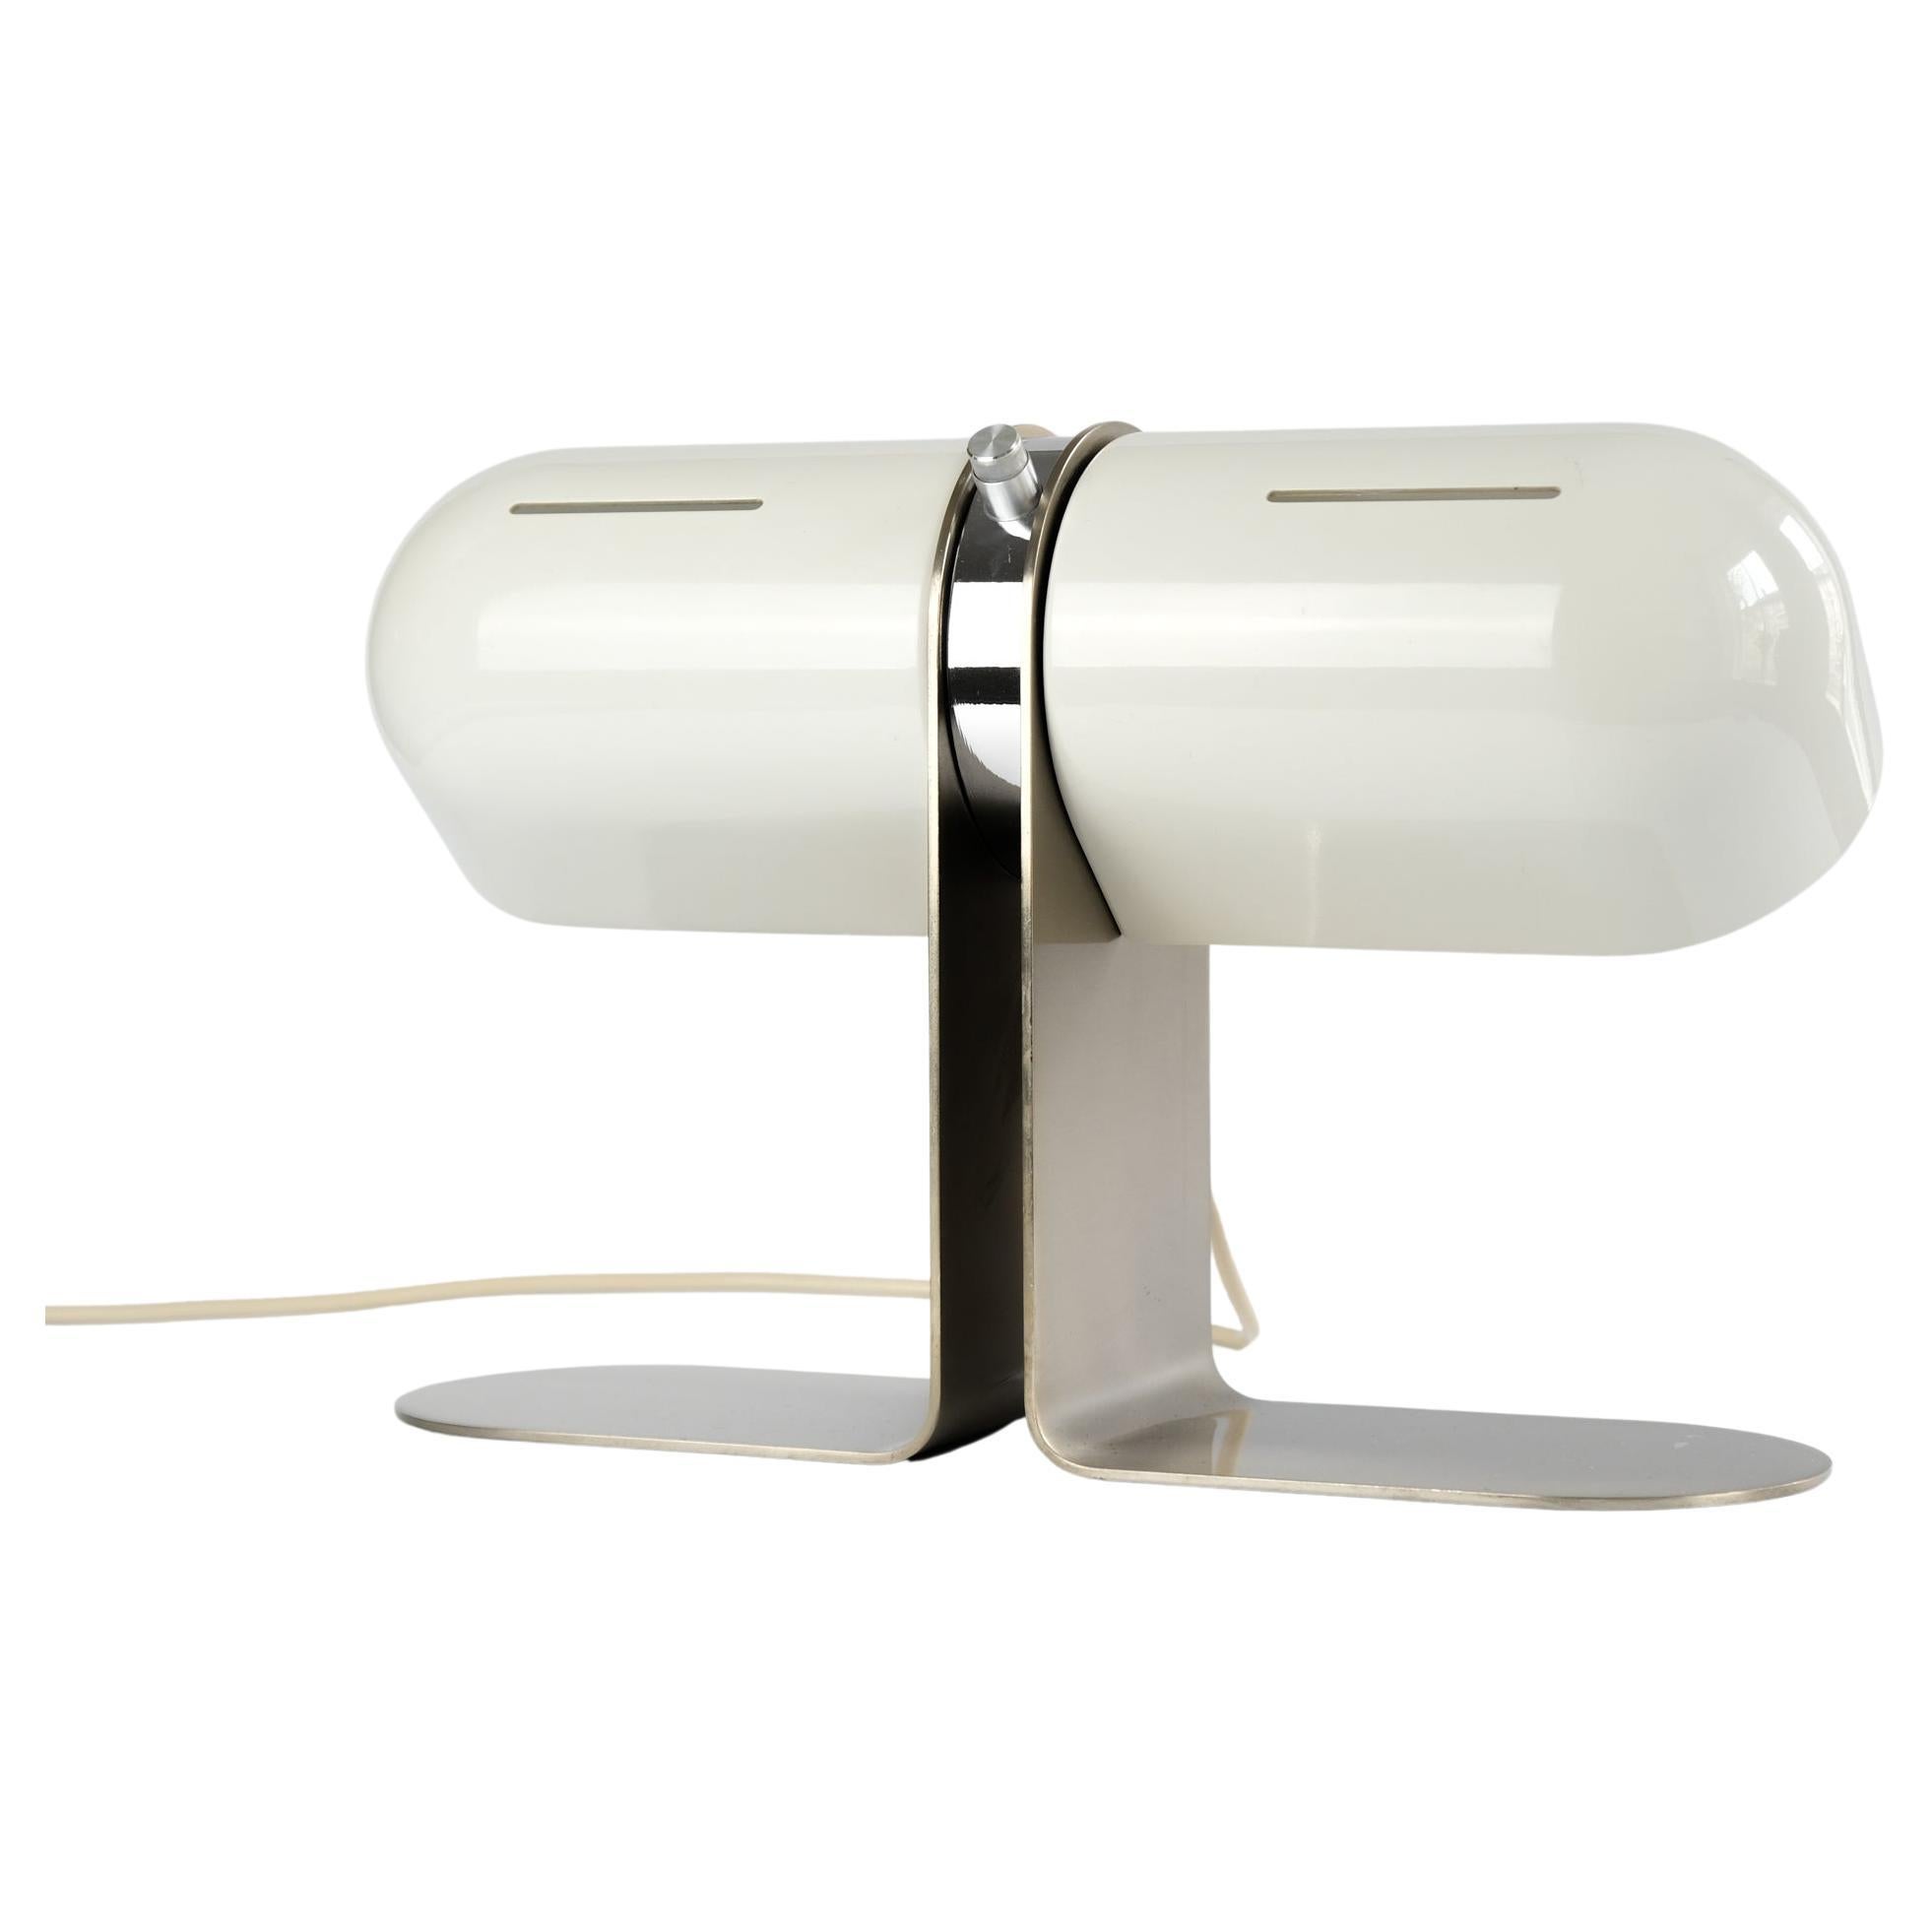 Early André Ricard Mid-Century Table Lamp For Metalarte, Spain 1973 For Sale